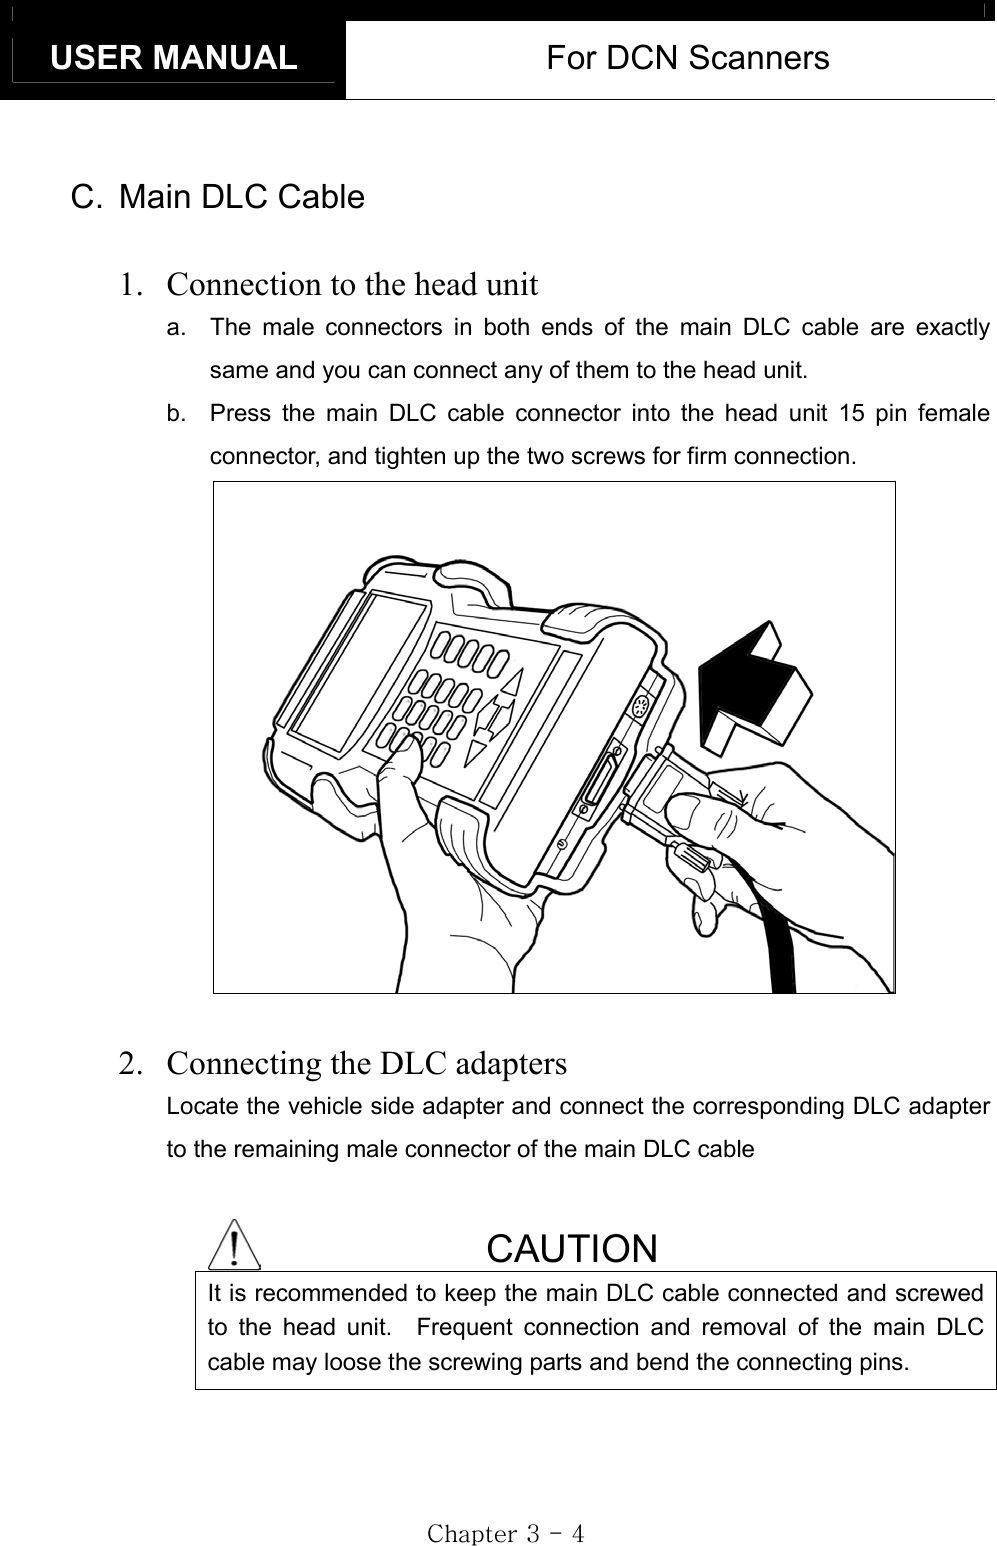 USER MANUAL  For DCN Scanners GjGZGTG[GC.  Main DLC Cable 1.  Connection to the head unita.  The male connectors in both ends of the main DLC cable are exactly same and you can connect any of them to the head unit. b.  Press the main DLC cable connector into the head unit 15 pin female connector, and tighten up the two screws for firm connection.   2.  Connecting the DLC adaptersLocate the vehicle side adapter and connect the corresponding DLC adapter to the remaining male connector of the main DLC cable CAUTION It is recommended to keep the main DLC cable connected and screwed to the head unit.  Frequent connection and removal of the main DLC cable may loose the screwing parts and bend the connecting pins. 